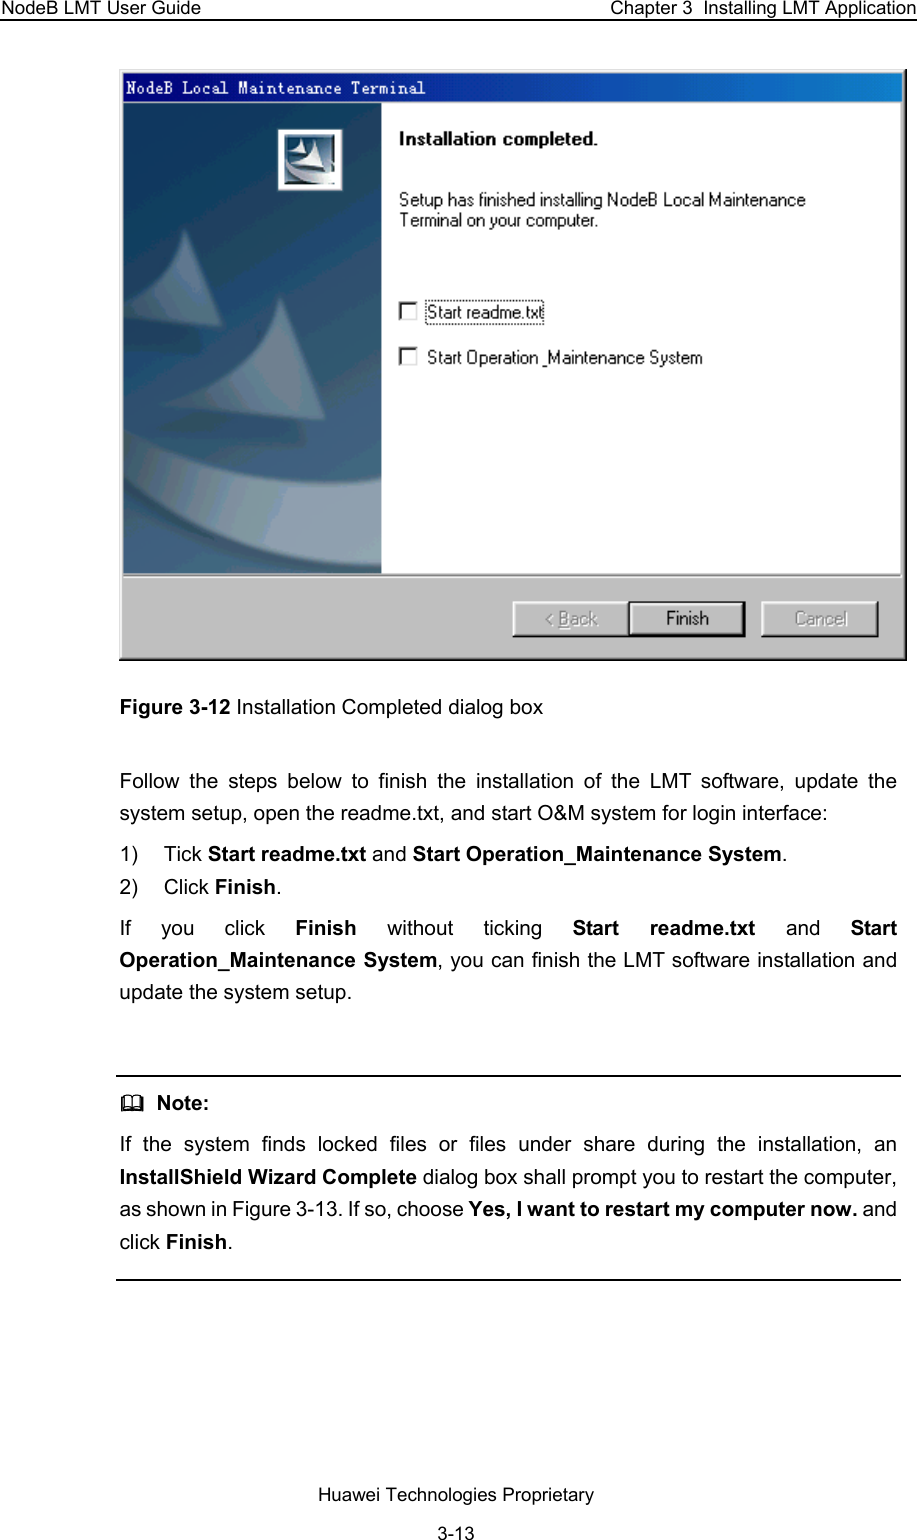 NodeB LMT User Guide  Chapter 3  Installing LMT Application  Figure 3-12 Installation Completed dialog box Follow the steps below to finish the installation of the LMT software, update the system setup, open the readme.txt, and start O&amp;M system for login interface:  1) Tick Start readme.txt and Start Operation_Maintenance System. 2) Click Finish.  If you click Finish  without ticking Start readme.txt and  Start Operation_Maintenance System, you can finish the LMT software installation and update the system setup.     Note: If the system finds locked files or files under share during the installation, an InstallShield Wizard Complete dialog box shall prompt you to restart the computer, as shown in Figure 3-13. If so, choose Yes, I want to restart my computer now. and click Finish.   Huawei Technologies Proprietary 3-13 